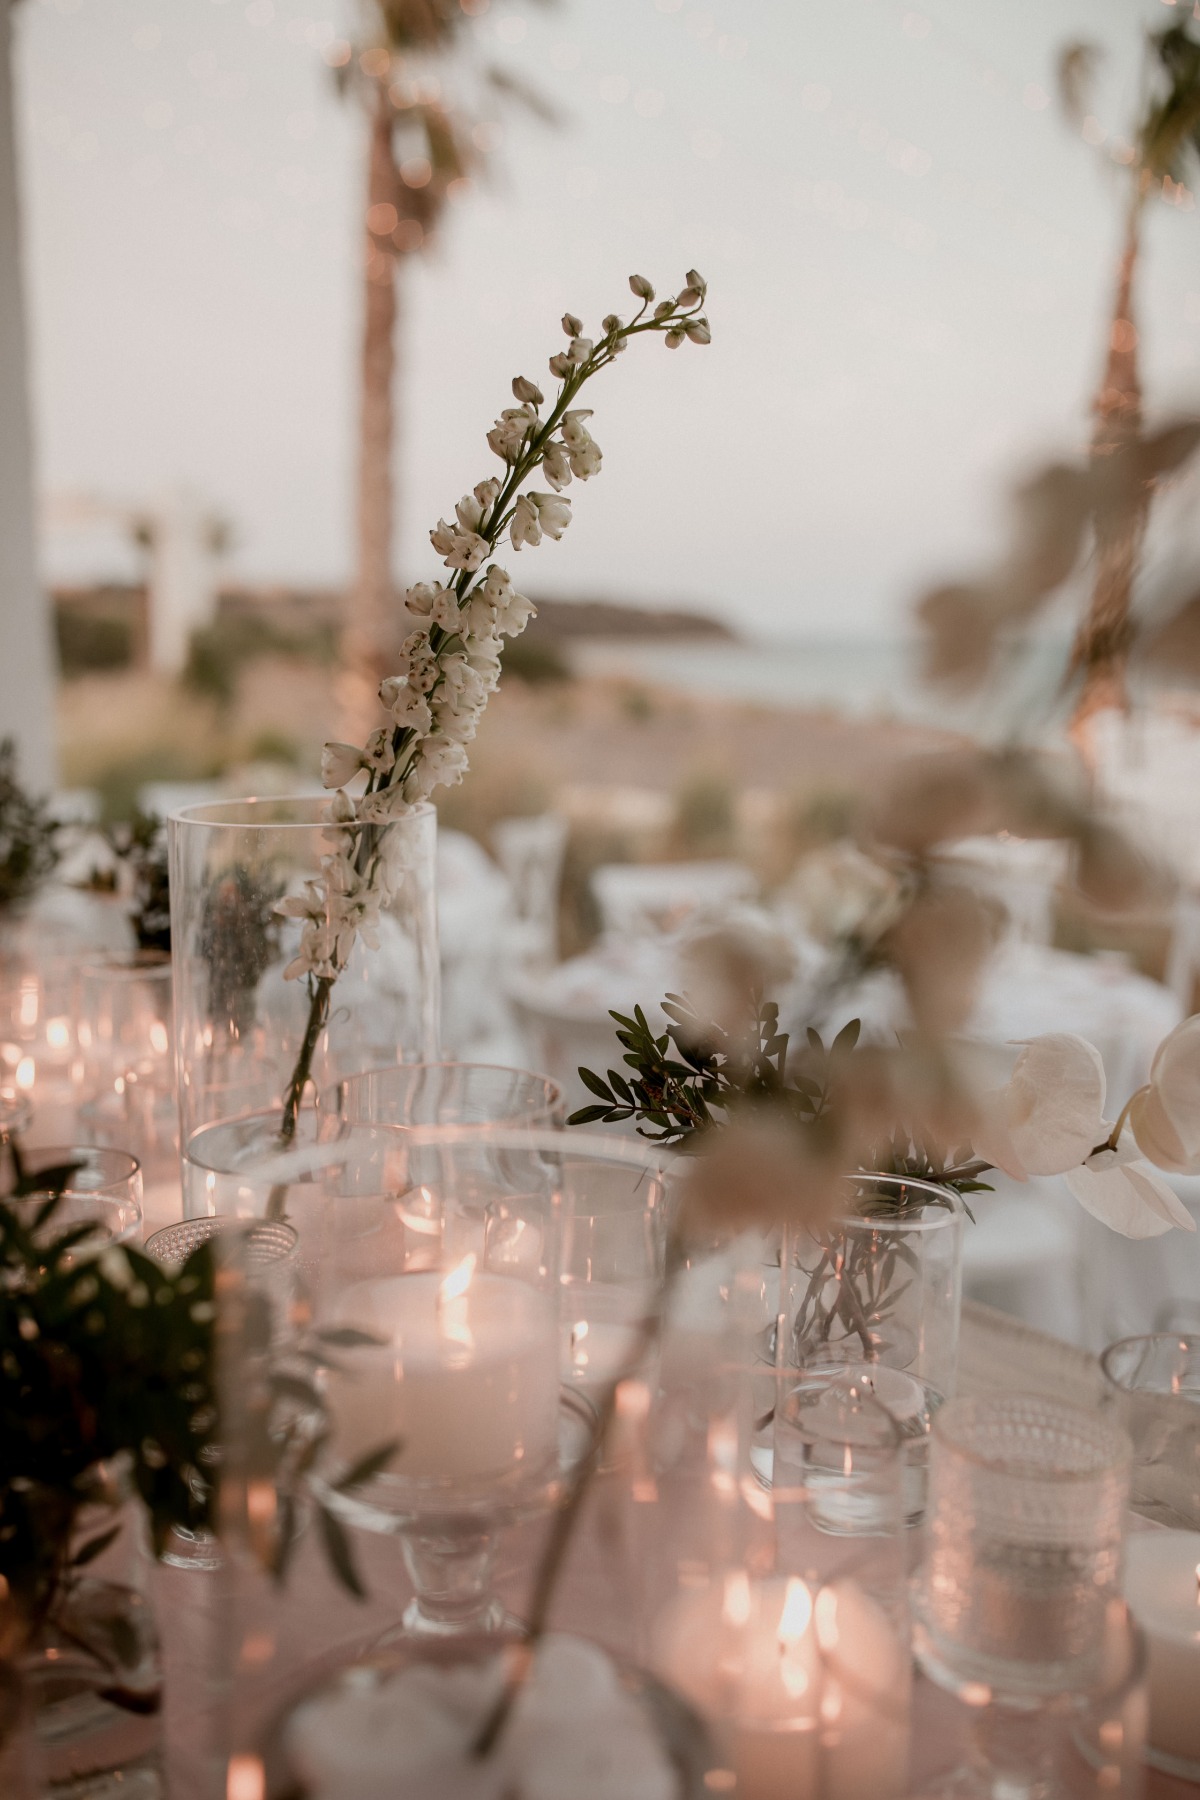 Take in Rhodes through Rose-Colored Glasses for this Romantic Destination Wedding in the Greek Islands